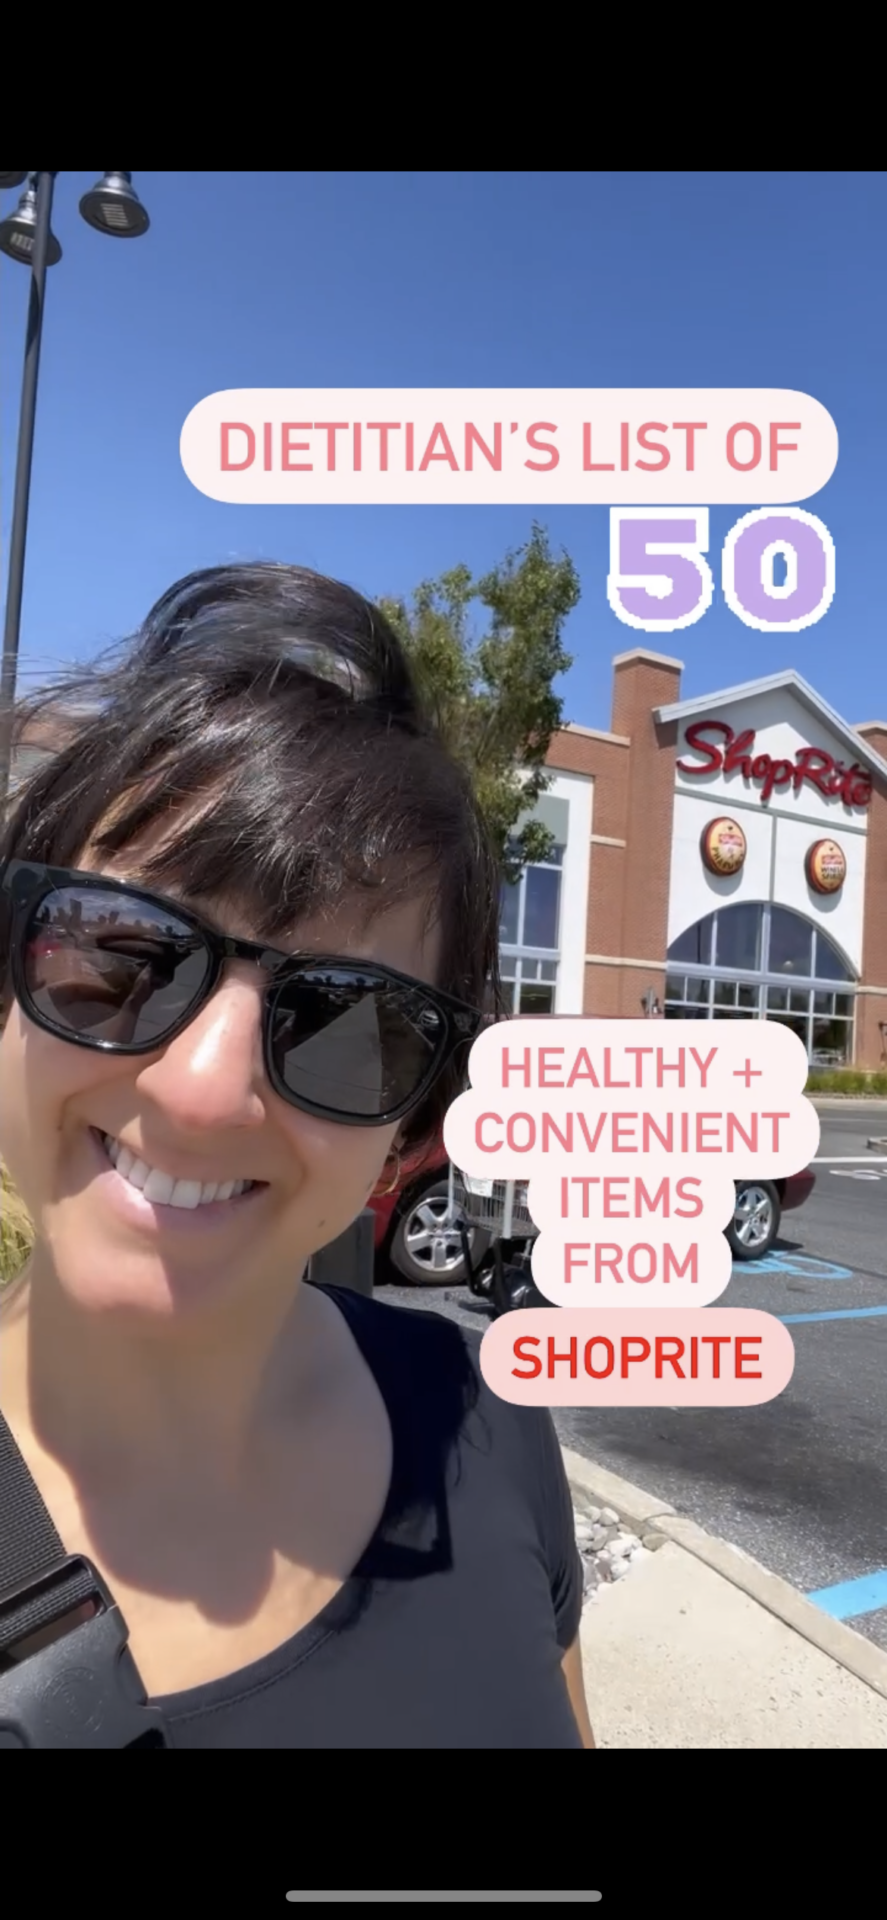 ShopRite - Ingredients for all of life's recipes! Add a savory and